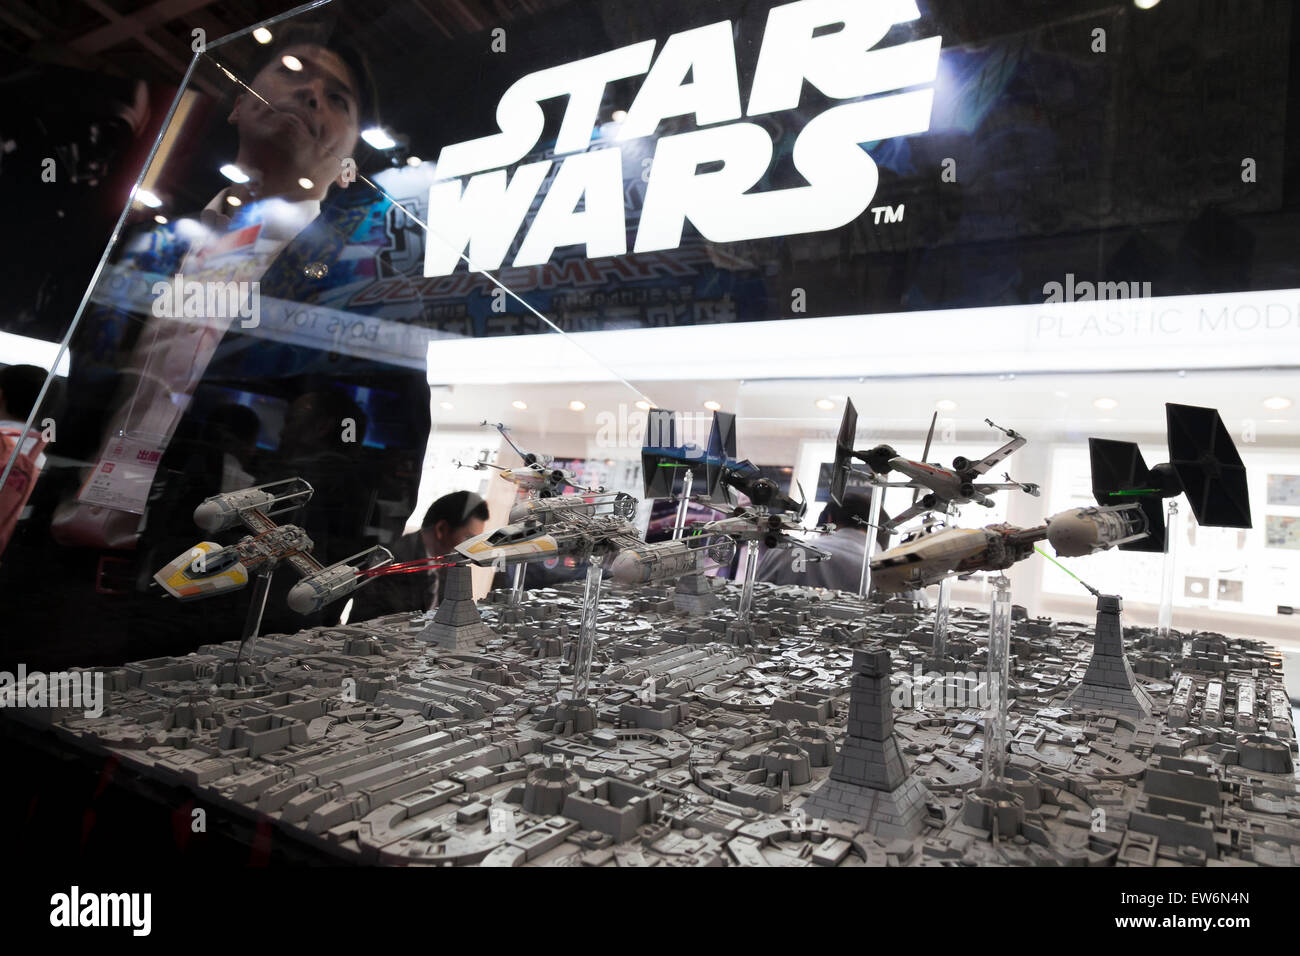 Scale models of the battle spaceships of Star Wars on display at the International Tokyo Toy Show 2015 in Tokyo Big Sight on June 18, 2015, Tokyo, Japan. Japan's largest trade show for toy makers attracts buyers and collectors by introducing the latest products from different toymakers from Japan and overseas. The toy fair showcases about 35,000 toys from 149 domestic and foreign companies and is held over four days. © Rodrigo Reyes Marin/AFLO/Alamy Live News Stock Photo